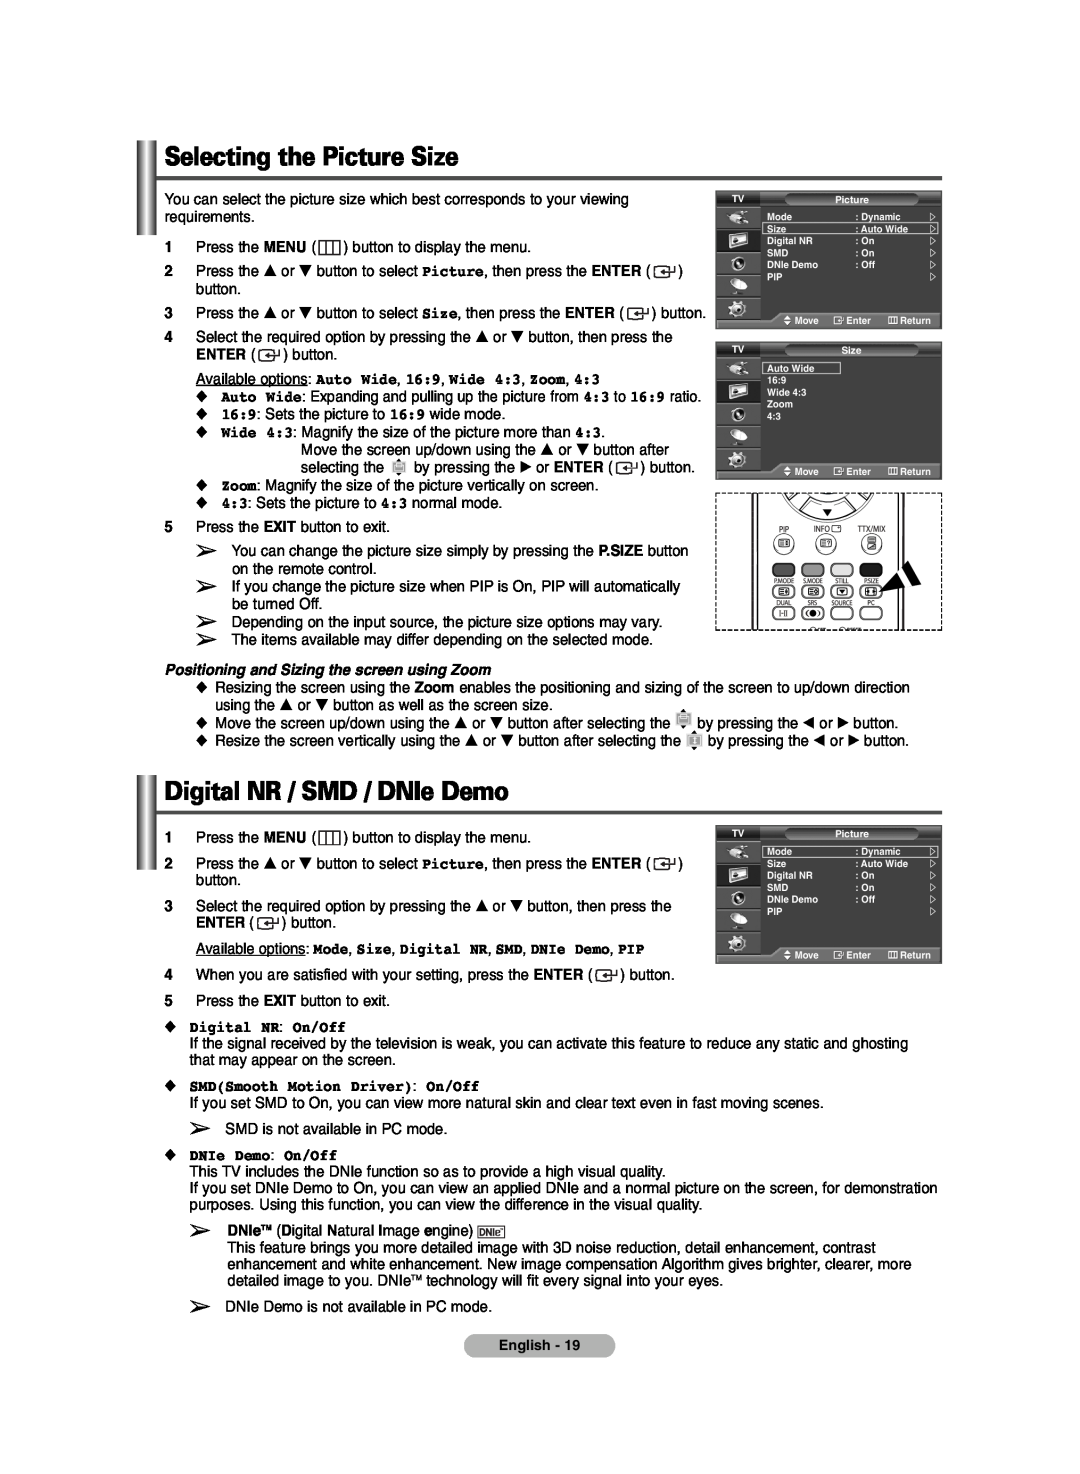 Samsung PDP-TELEVISION manual Selecting the Picture Size, Digital NR / SMD / DNIe Demo, Digital NR On/Off, DNIe Demo On/Off 